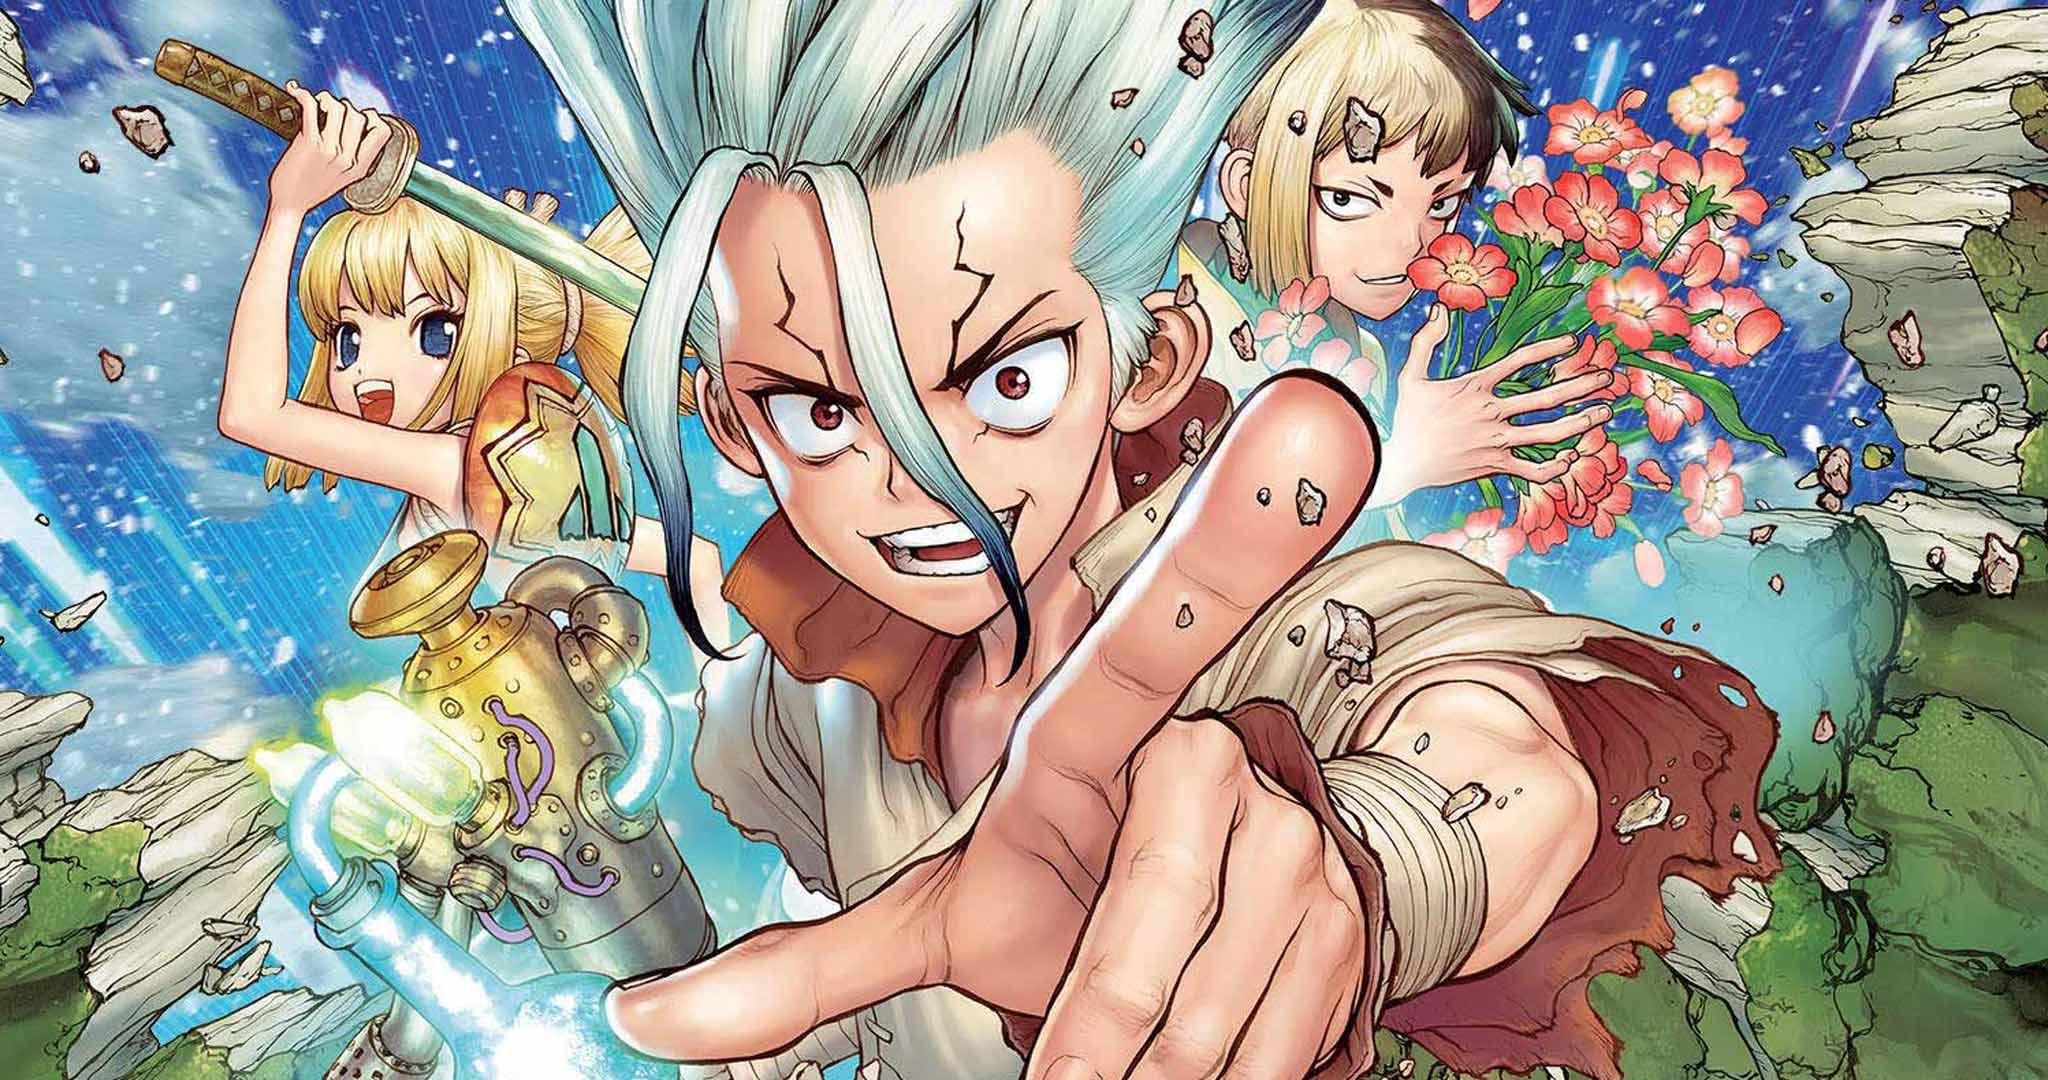 2048 x 1080 · jpeg - Dr. Stone Hd Anime Wallpapers - Wallpaper Cave